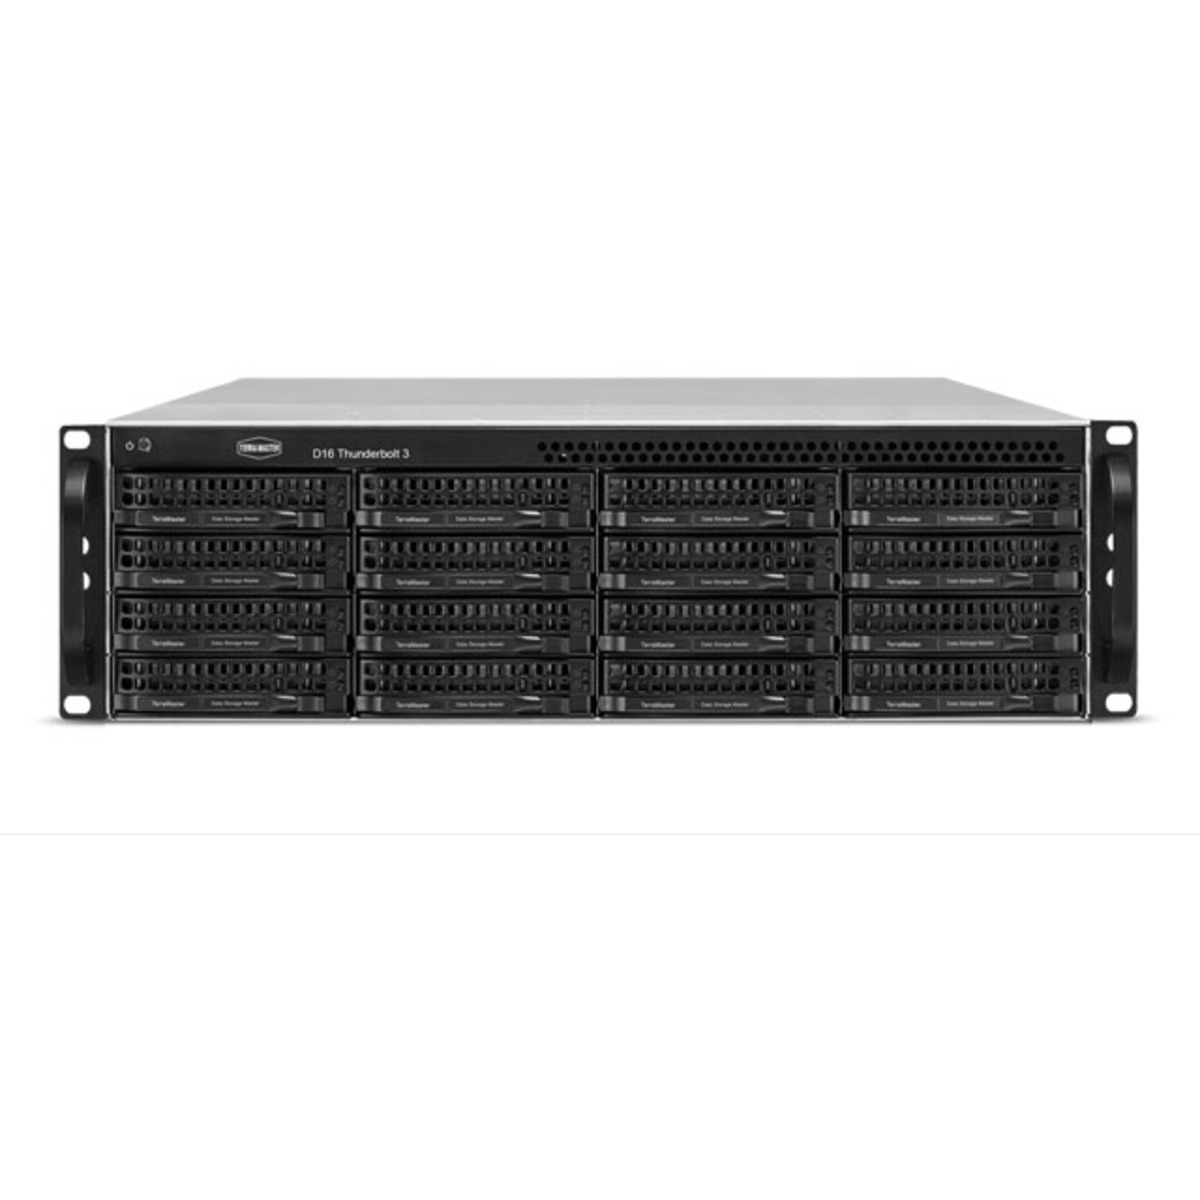 TerraMaster D16 Thunderbolt 3 90tb 16-Bay RackMount Multimedia / Power User / Business DAS - Direct Attached Storage Device 15x6tb Western Digital Red Pro WD6003FFBX 3.5 7200rpm SATA 6Gb/s HDD NAS Class Drives Installed - Burn-In Tested D16 Thunderbolt 3